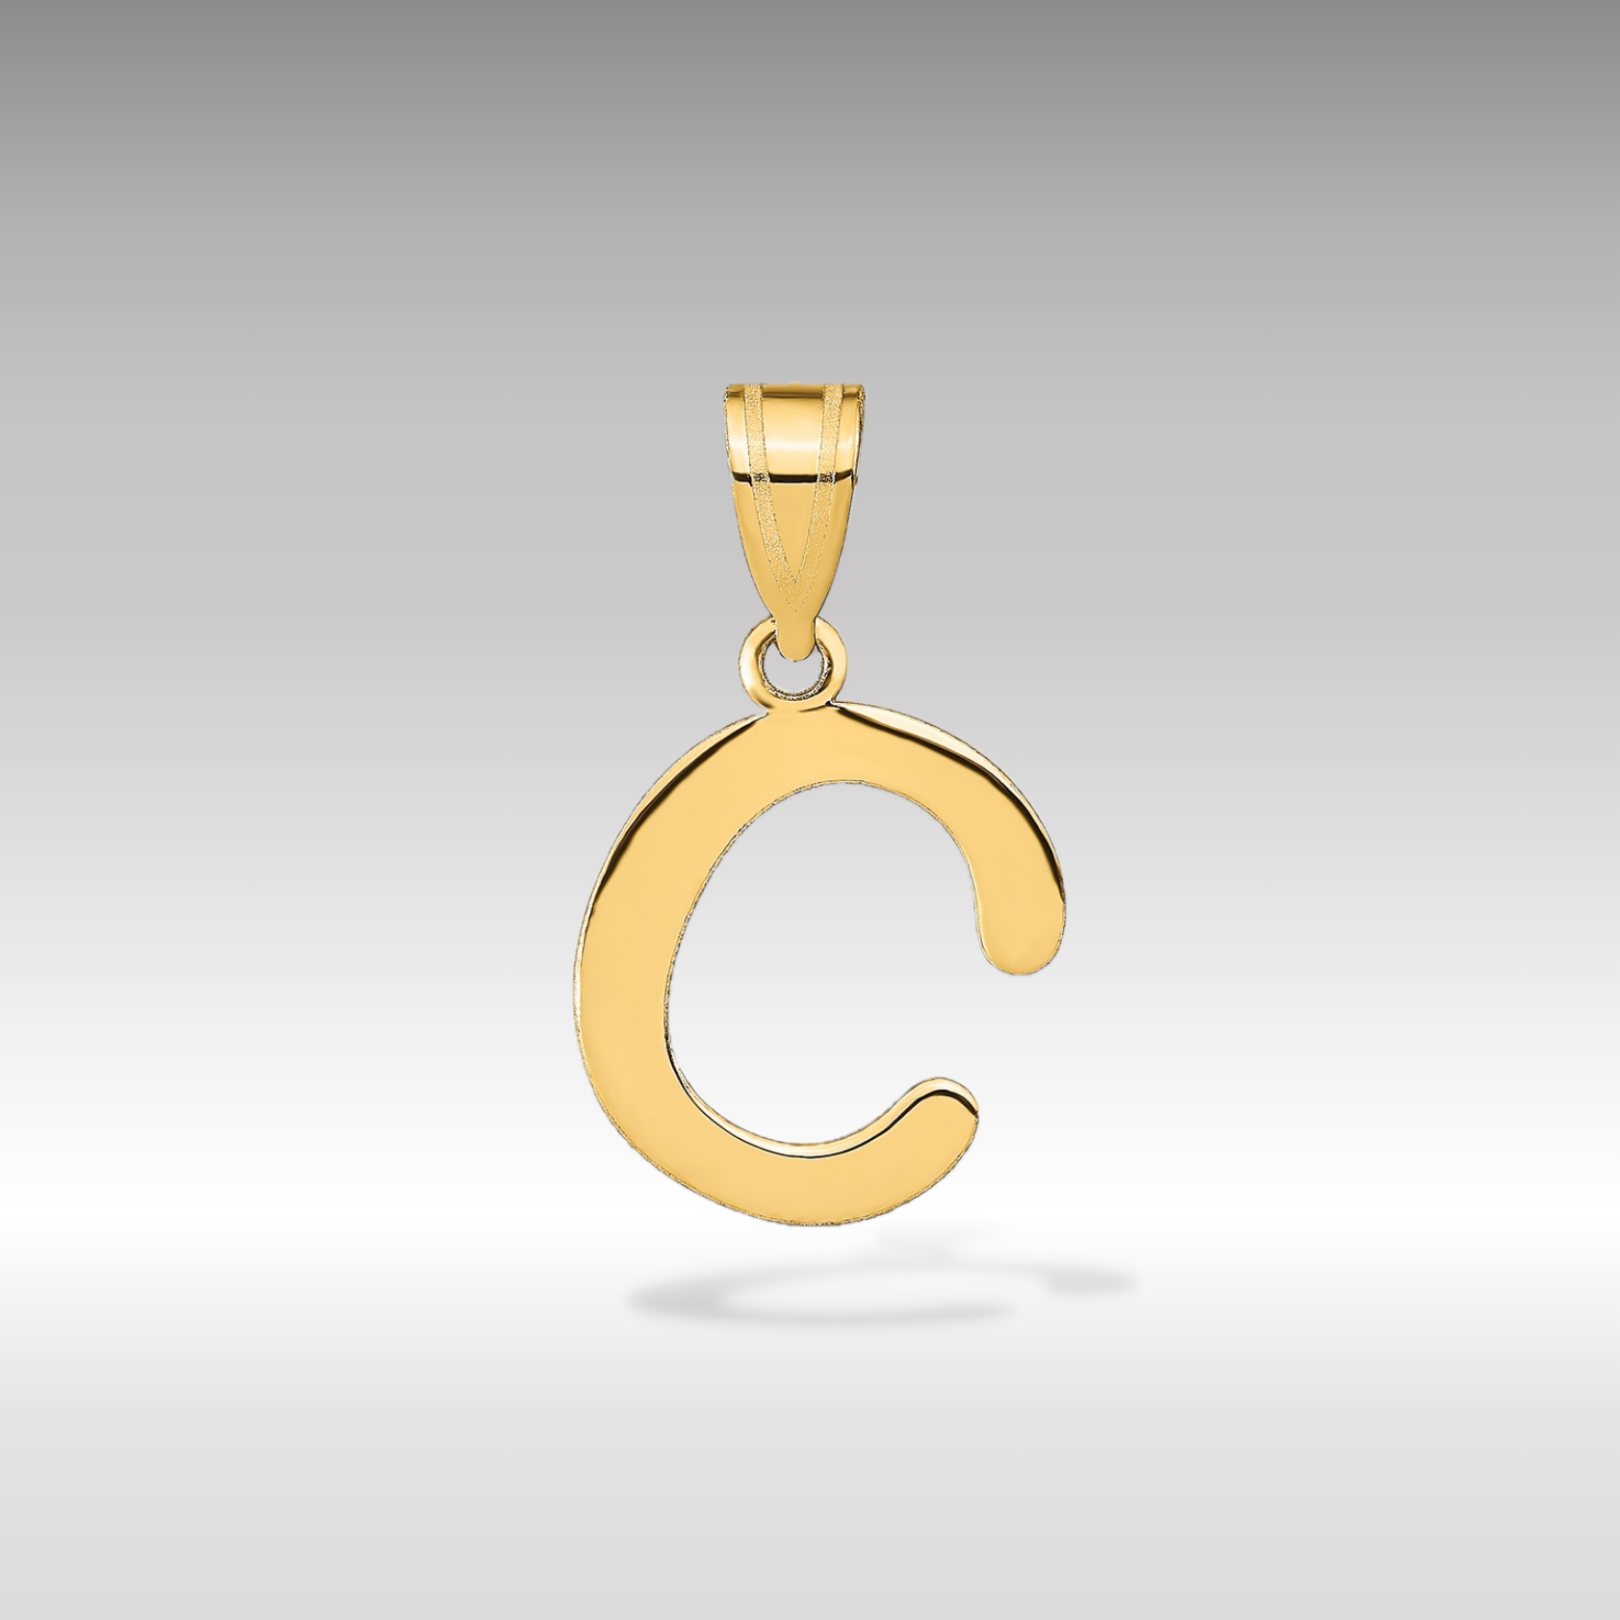 14k Gold Polished Letter 'C' Initial Charm - Charlie & Co. Jewelry